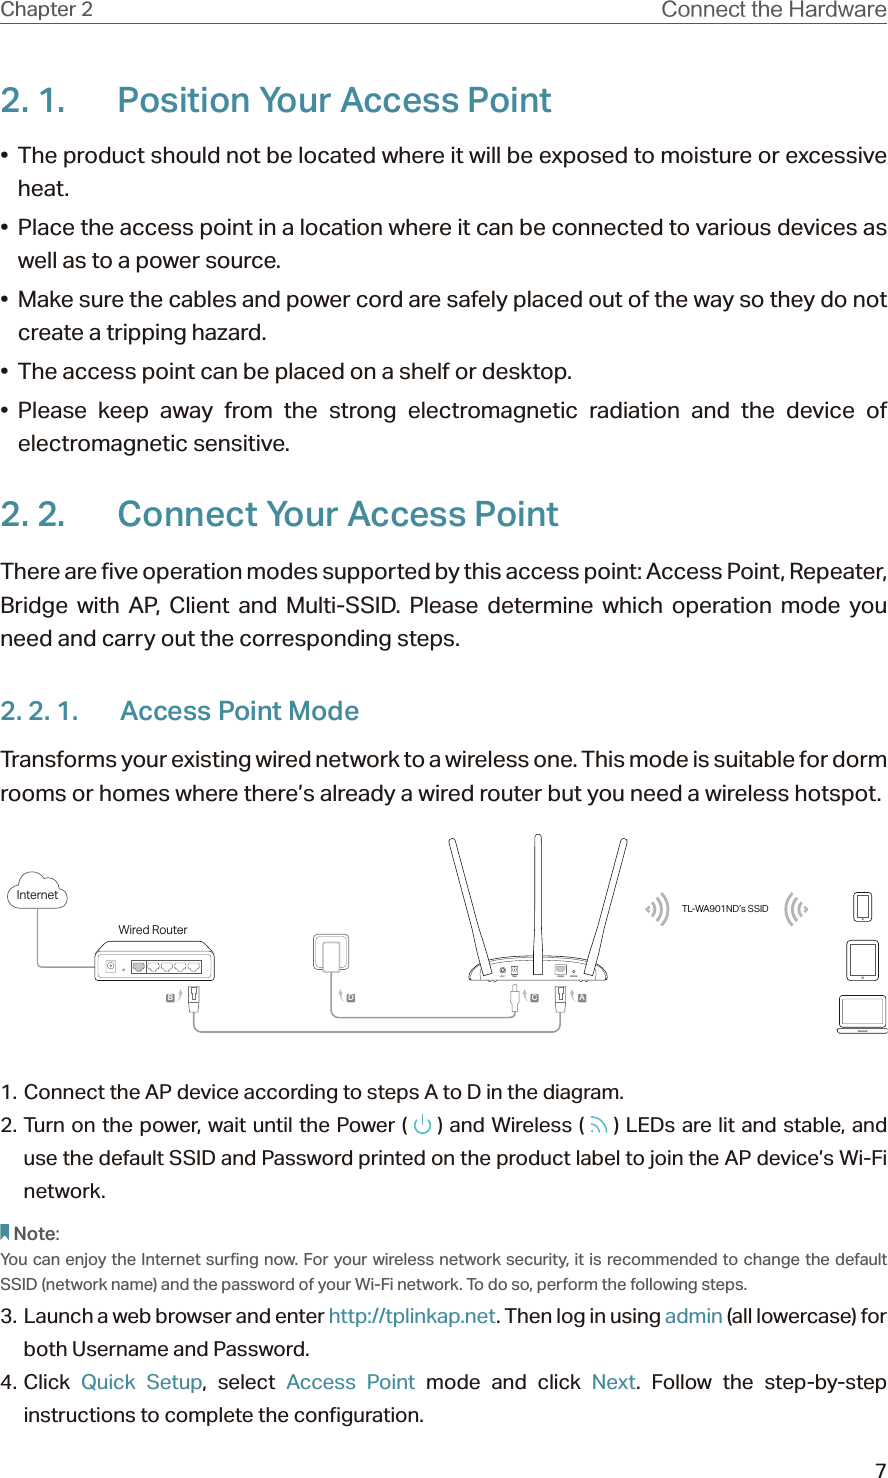 7Chapter 2 $POOFDUUIF)BSEXBSF2. 1.  Position Your Access Point•  The product should not be located where it will be exposed to moisture or excessive heat.•  Place the access point in a location where it can be connected to various devices as well as to a power source.•  Make sure the cables and power cord are safely placed out of the way so they do not create a tripping hazard.•  The access point can be placed on a shelf or desktop.• Please keep away from the strong electromagnetic radiation and the device of electromagnetic sensitive.2. 2.  Connect Your Access PointThere are five operation modes supported by this access point: Access Point, Repeater, Bridge with AP, Client and Multi-SSID. Please determine which operation mode you need and carry out the corresponding steps.2. 2. 1.  Access Point ModeTransforms your existing wired network to a wireless one. This mode is suitable for dorm rooms or homes where there’s already a wired router but you need a wireless hotspot.Wired RouterInternetTL-WA901ND’s SSIDABCD1. Connect the AP device according to steps A to D in the diagram.2. Turn on the power, wait until the Power (   ) and Wireless (   ) LEDs are lit and stable, and use the default SSID and Password printed on the product label to join the AP device’s Wi-Fi network.Note:You can enjoy the Internet surfing now. For your wireless network security, it is recommended to change the default SSID (network name) and the password of your Wi-Fi network. To do so, perform the following steps.3.  Launch a web browser and enter http://tplinkap.net. Then log in using admin (all lowercase) for both Username and Password.4. Click  Quick Setup, select Access Point mode and click Next. Follow the step-by-step instructions to complete the configuration.